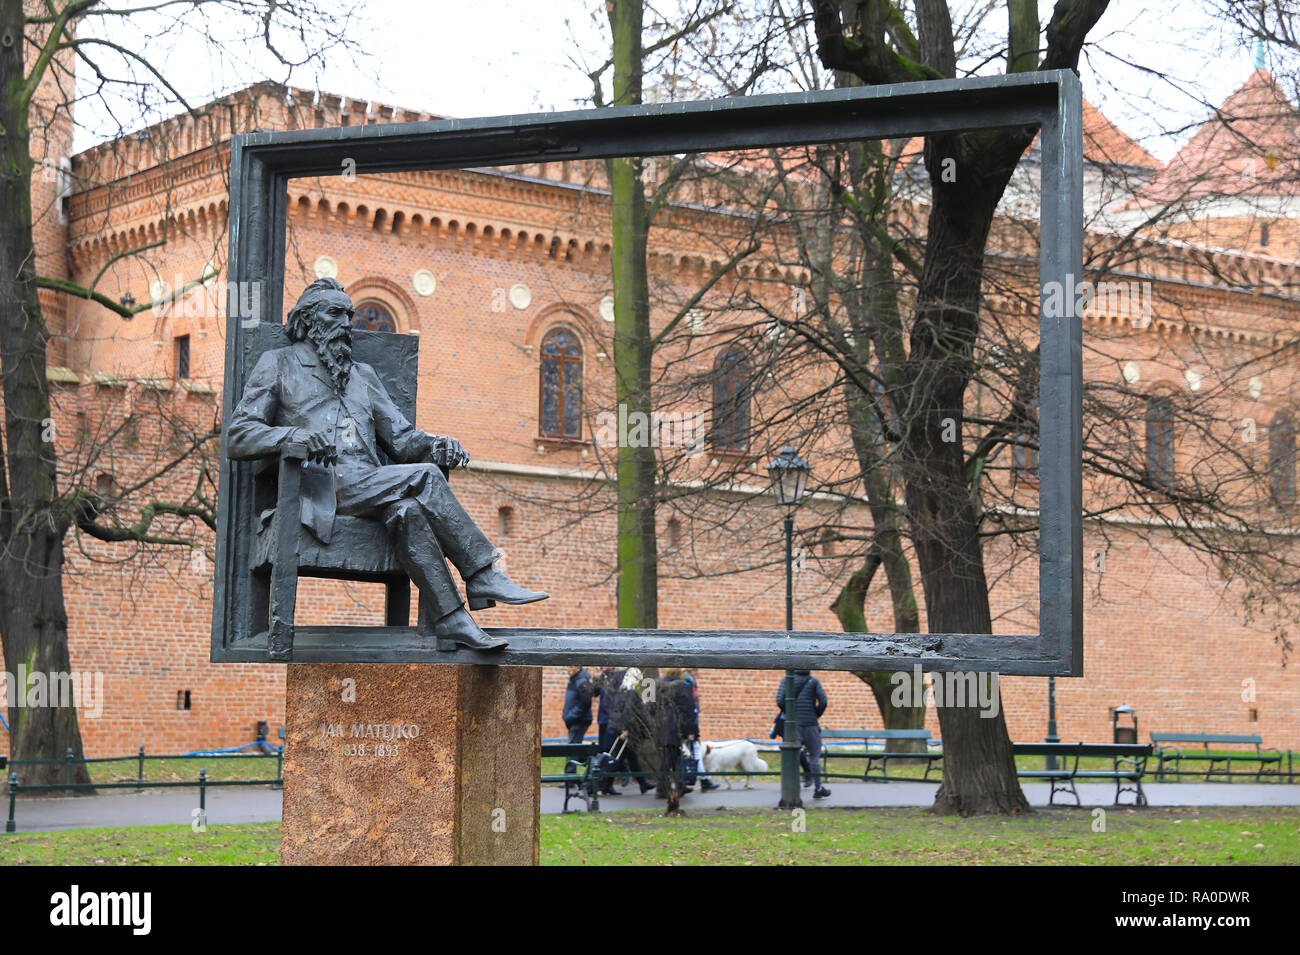 The Jan Matejko Monument, paying homage to one of Polands's greatest painters, just outside the Barbican in Krakow. Stock Photo